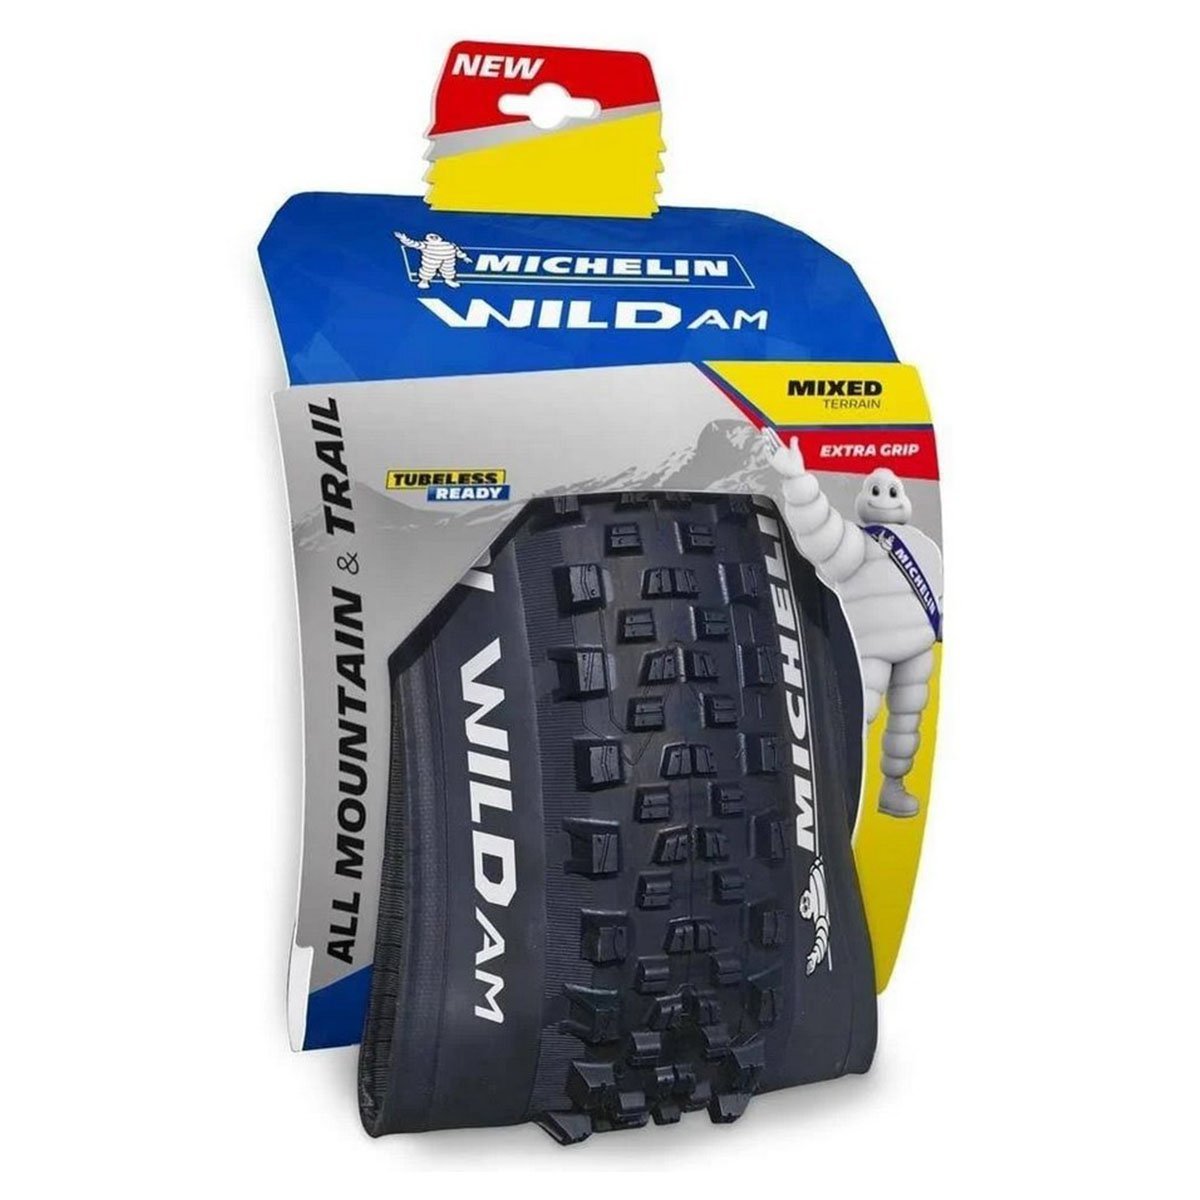 PNEU MICHELIN 29X2.35 WILD AM COMPETITION 3X60TPI KEVLAR TLR WILD AM COMPETITION LINE - 5